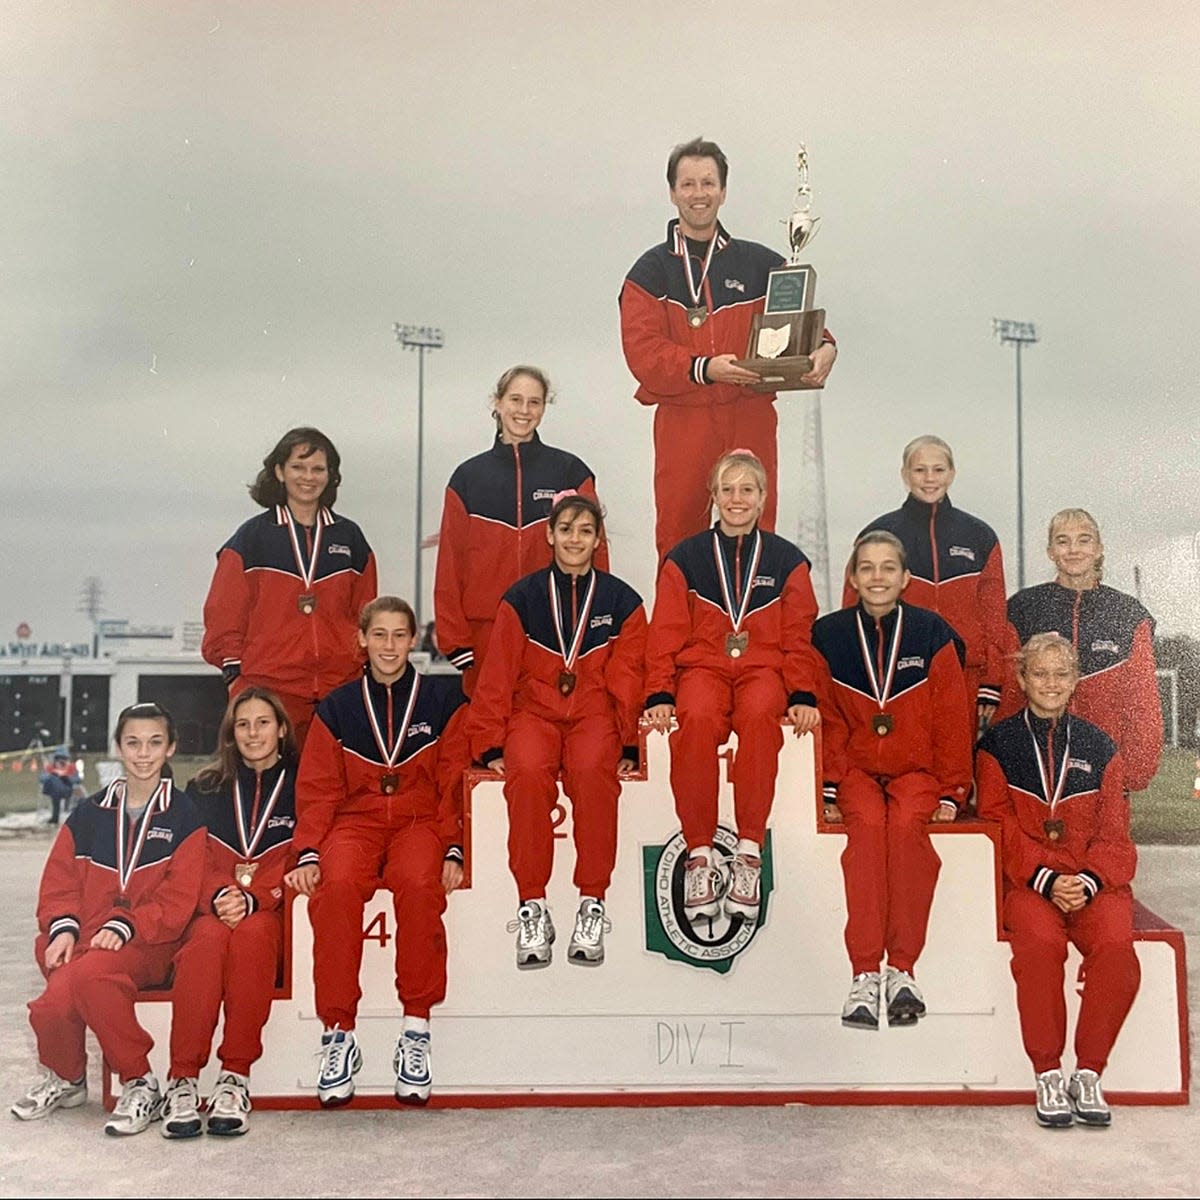 Led by head coach Ron Russo (back row, center), the 1997 Colerain girls cross country won the first of four straight state championships.